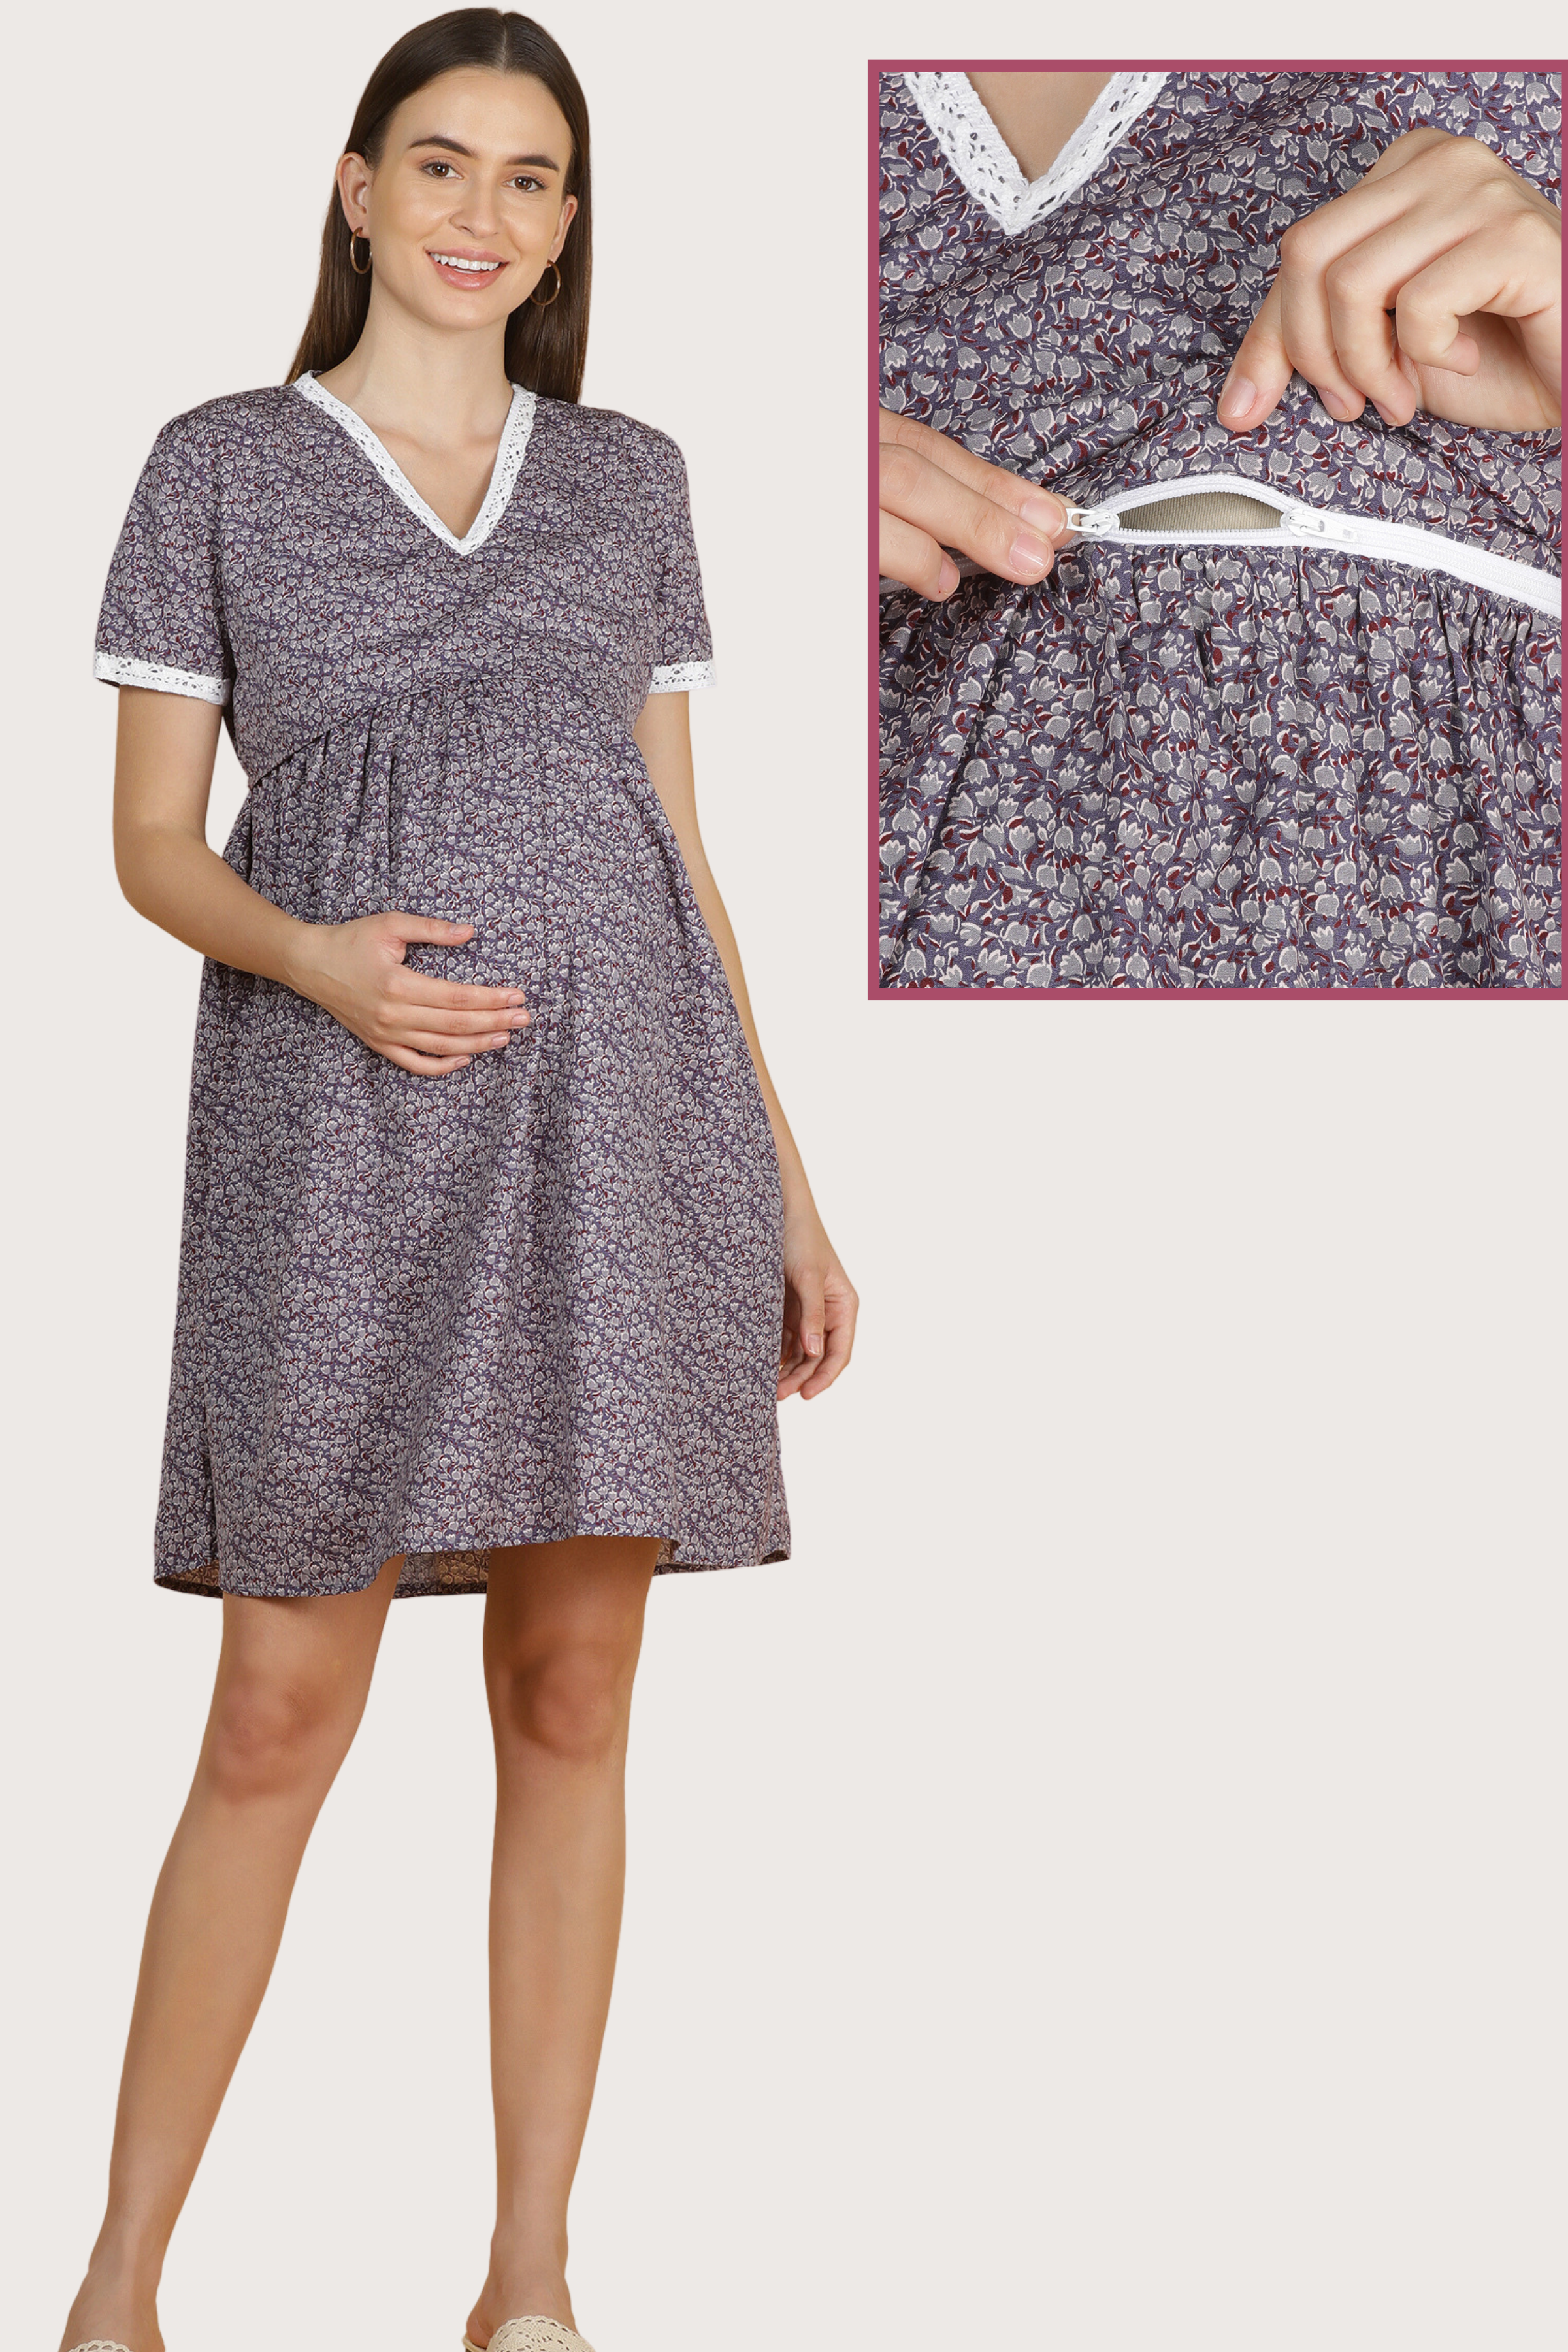 Buy Lovely mom's Nursing Dress for Feeding, Printed Maternity Dress with  Zipper for Post Pregancy, Breast Feeding Cotton Rayon Black - L at Amazon.in